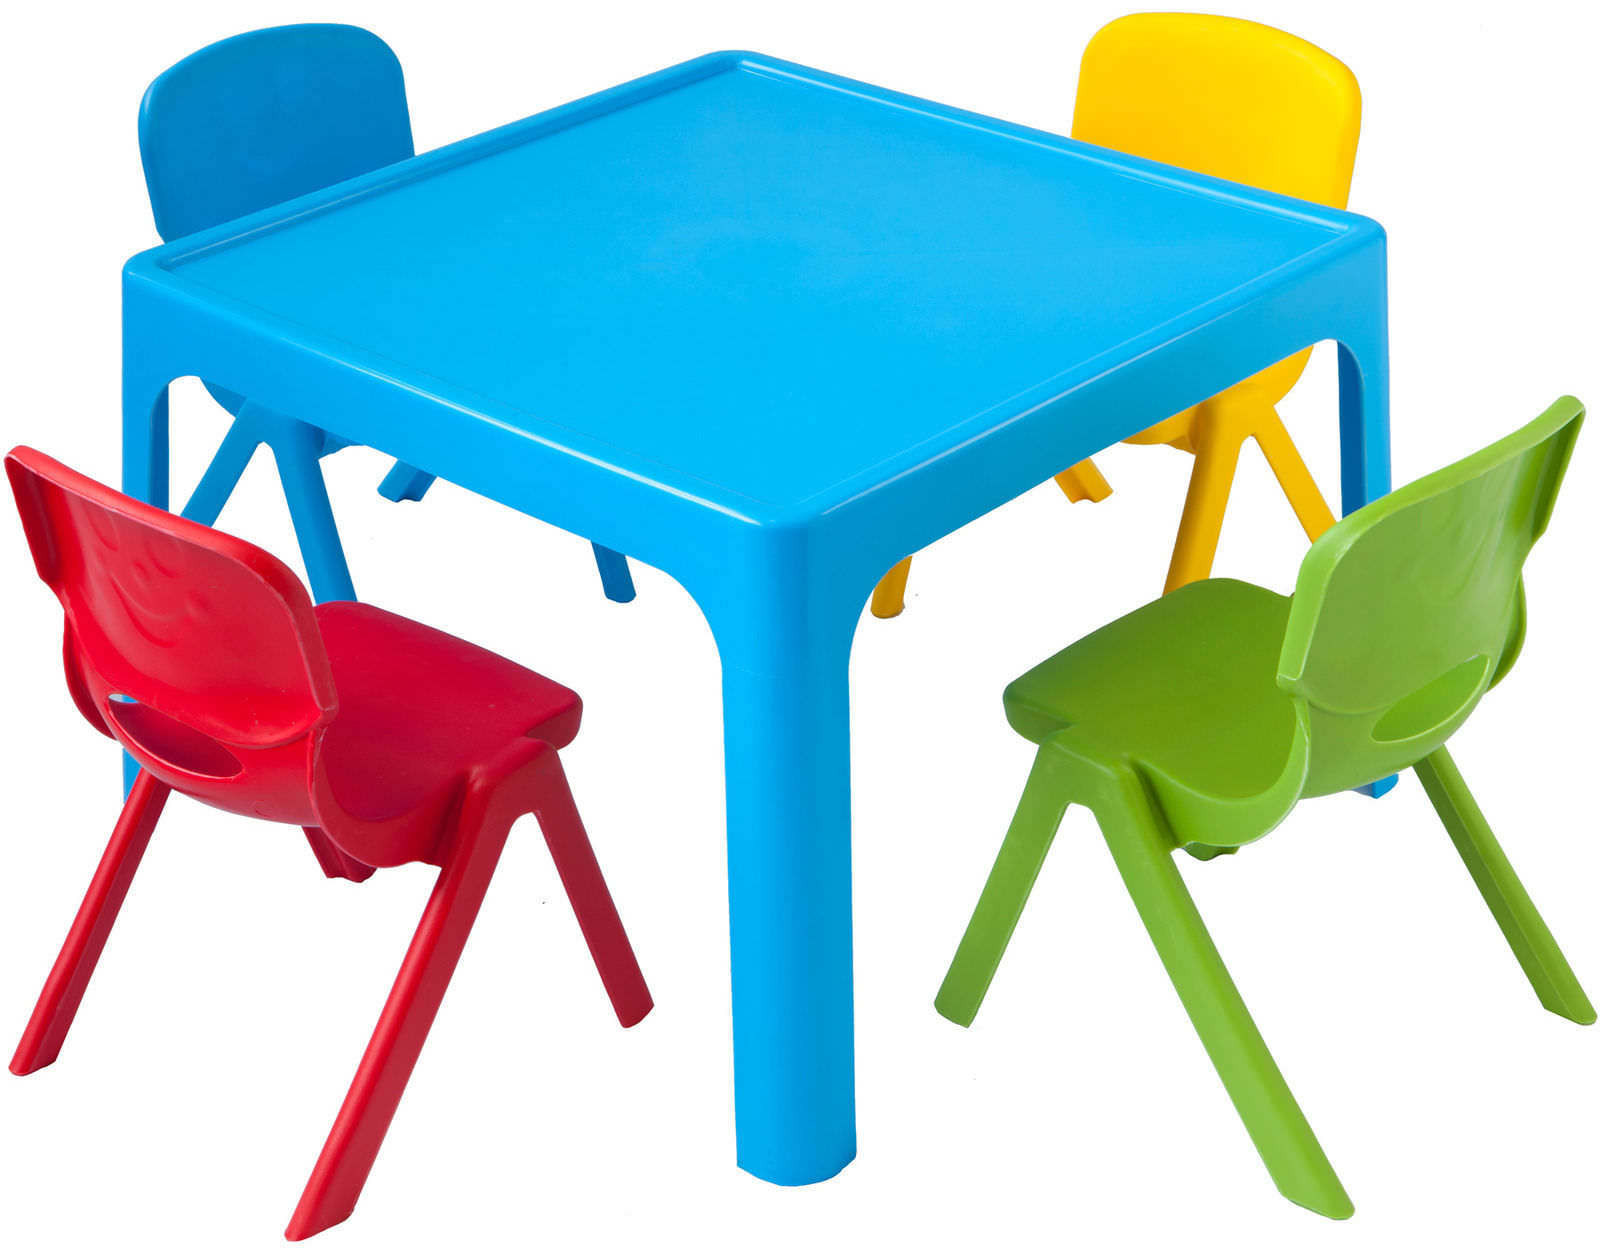 Kids Outdoor Table And Chairs
 Kids Table and Chairs